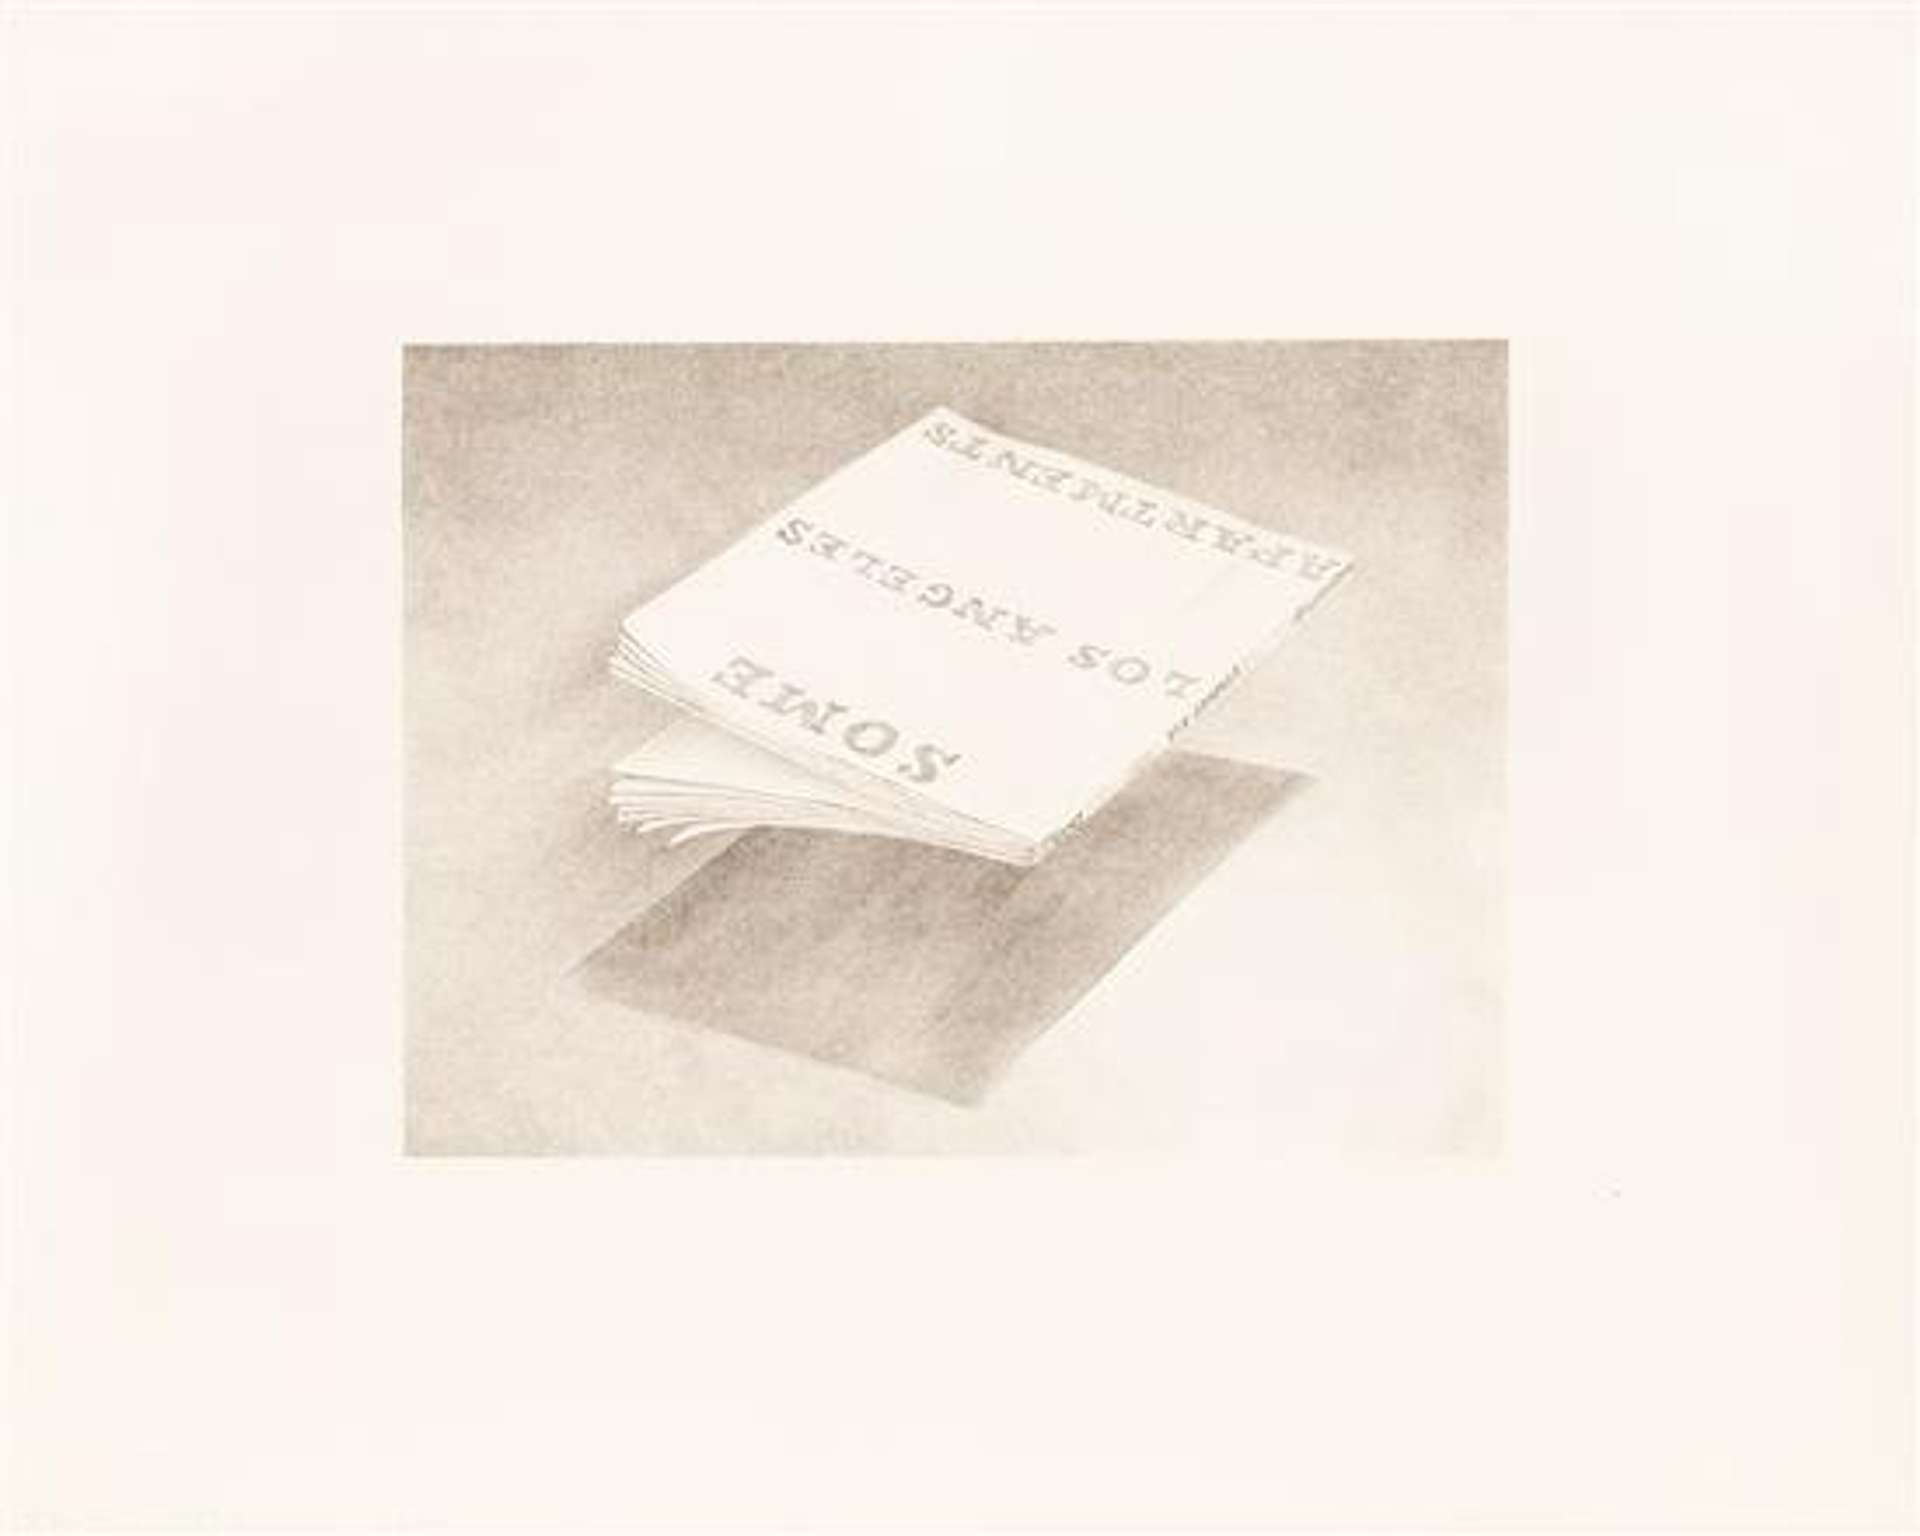 Ed Ruscha: Some Los Angeles Apartments, Book Cover - Signed Print